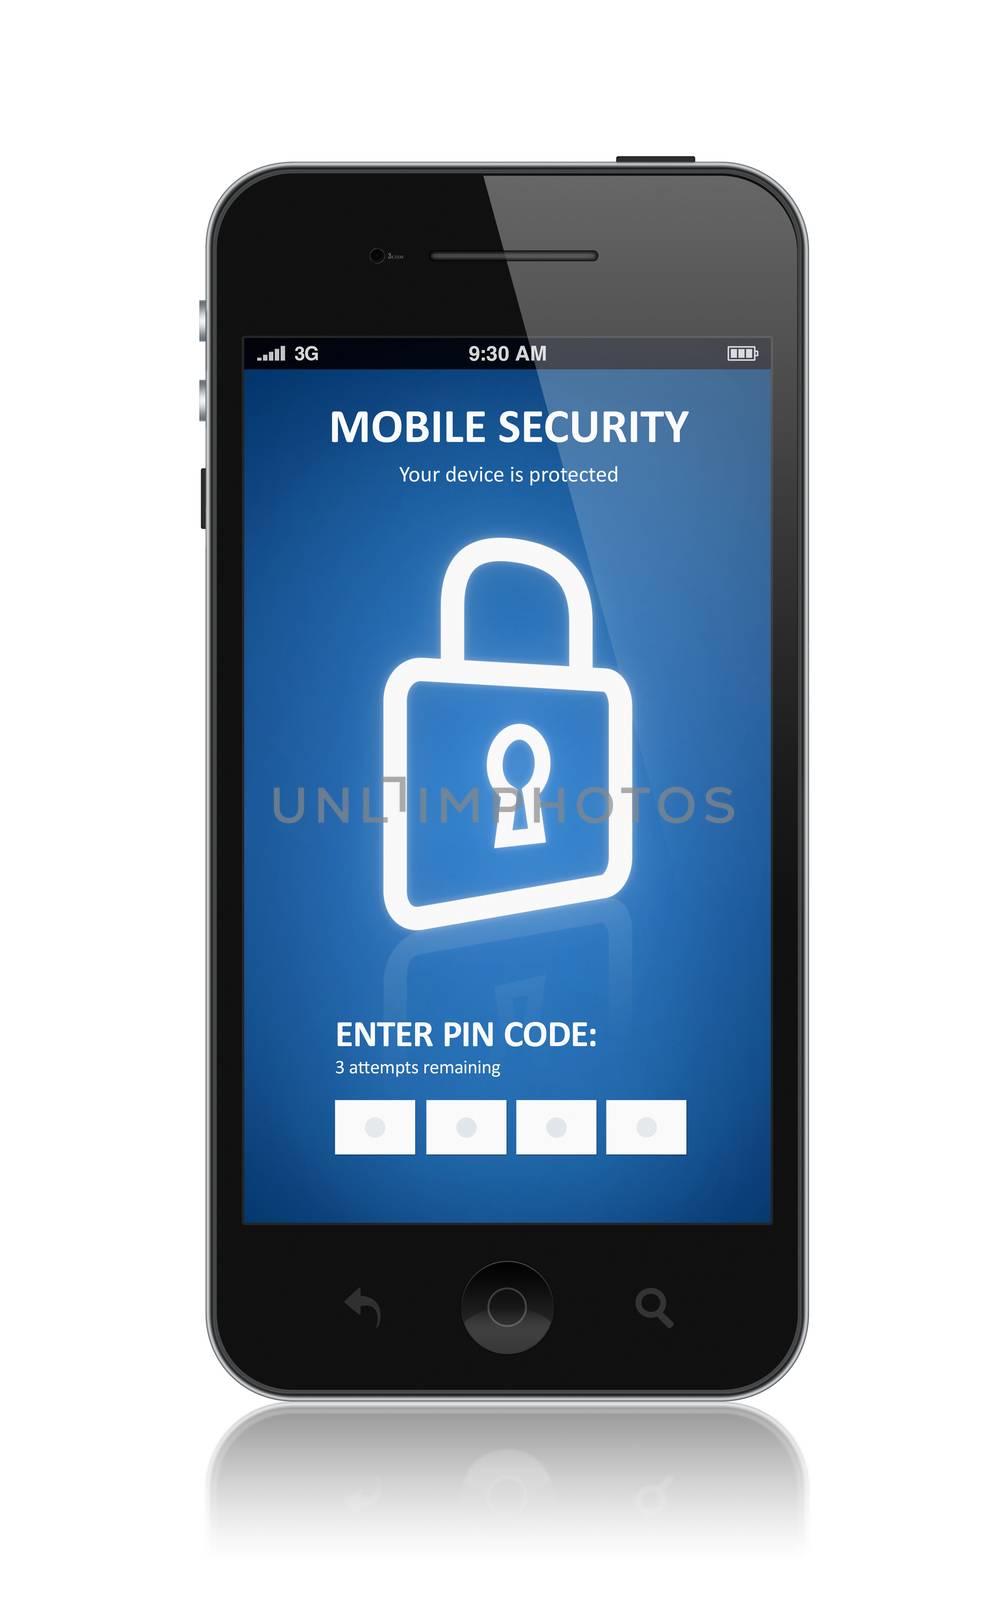 Modern smartphone with mobile security application interface on a screen. Isolated on white background